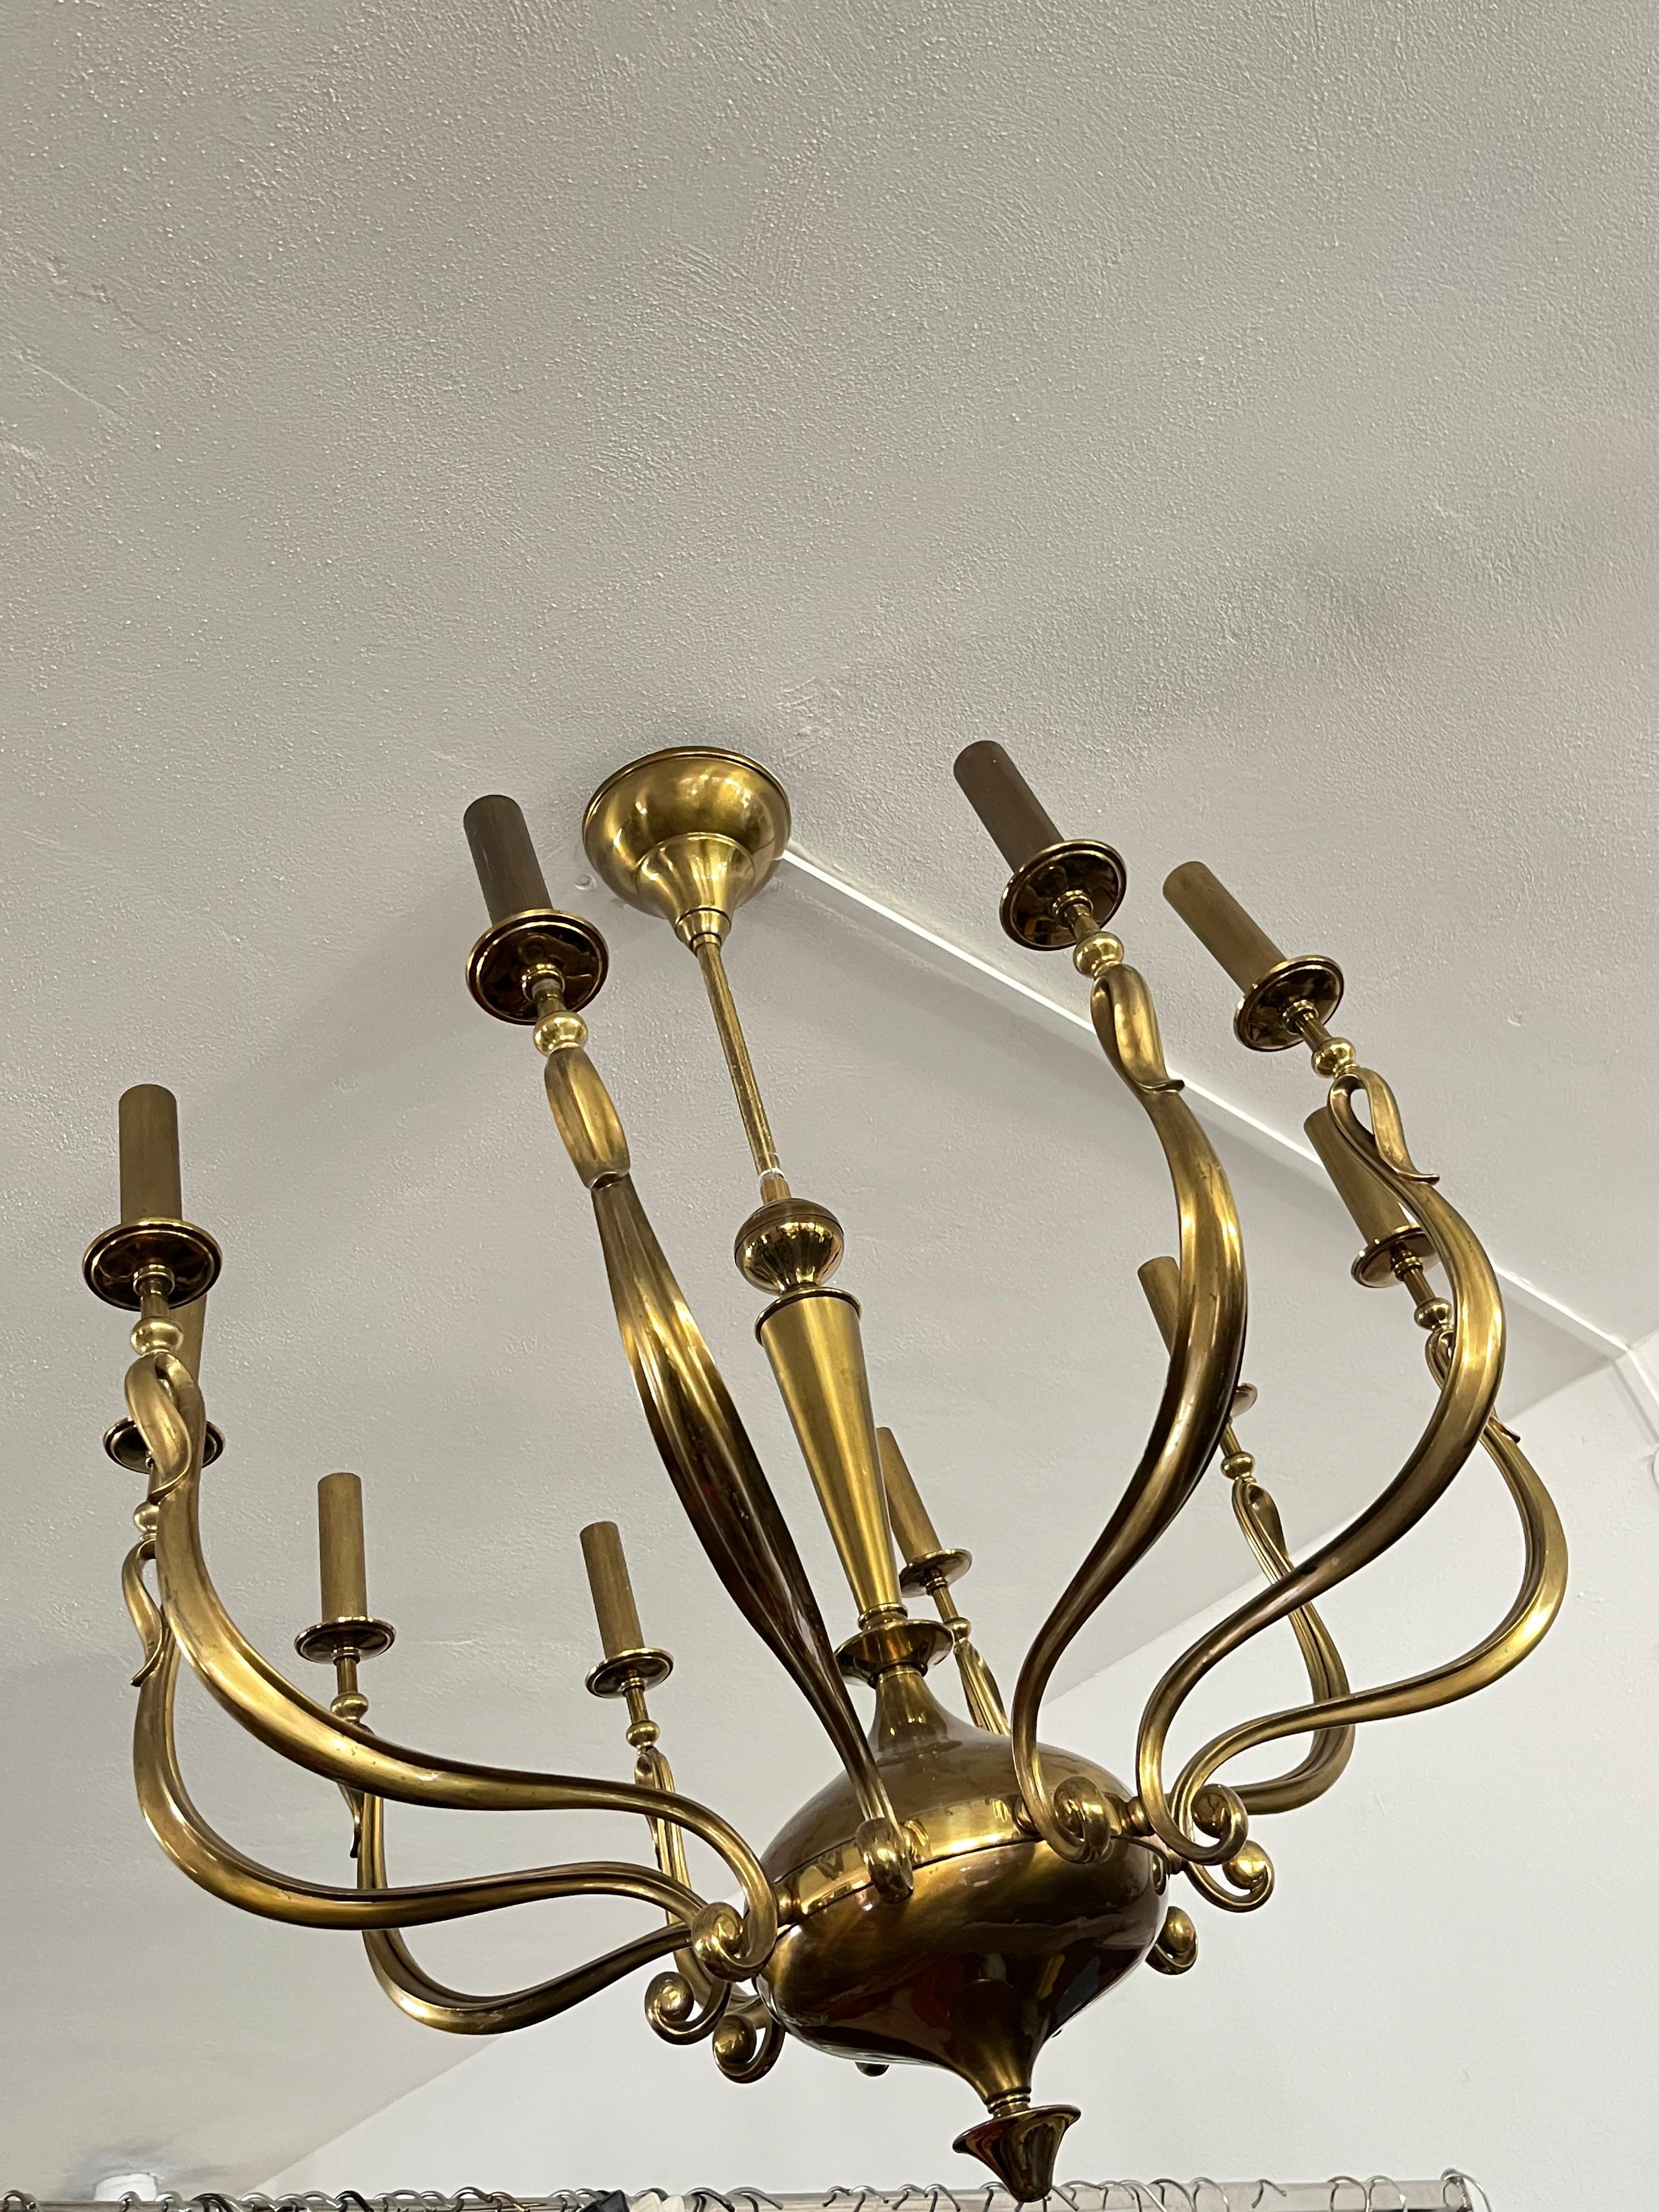 Large 10-light brass chandelier, Italy, 1950s
Found in a noble apartment, it is very beautiful and elegant.
Intact and functional, small signs of ageing.
